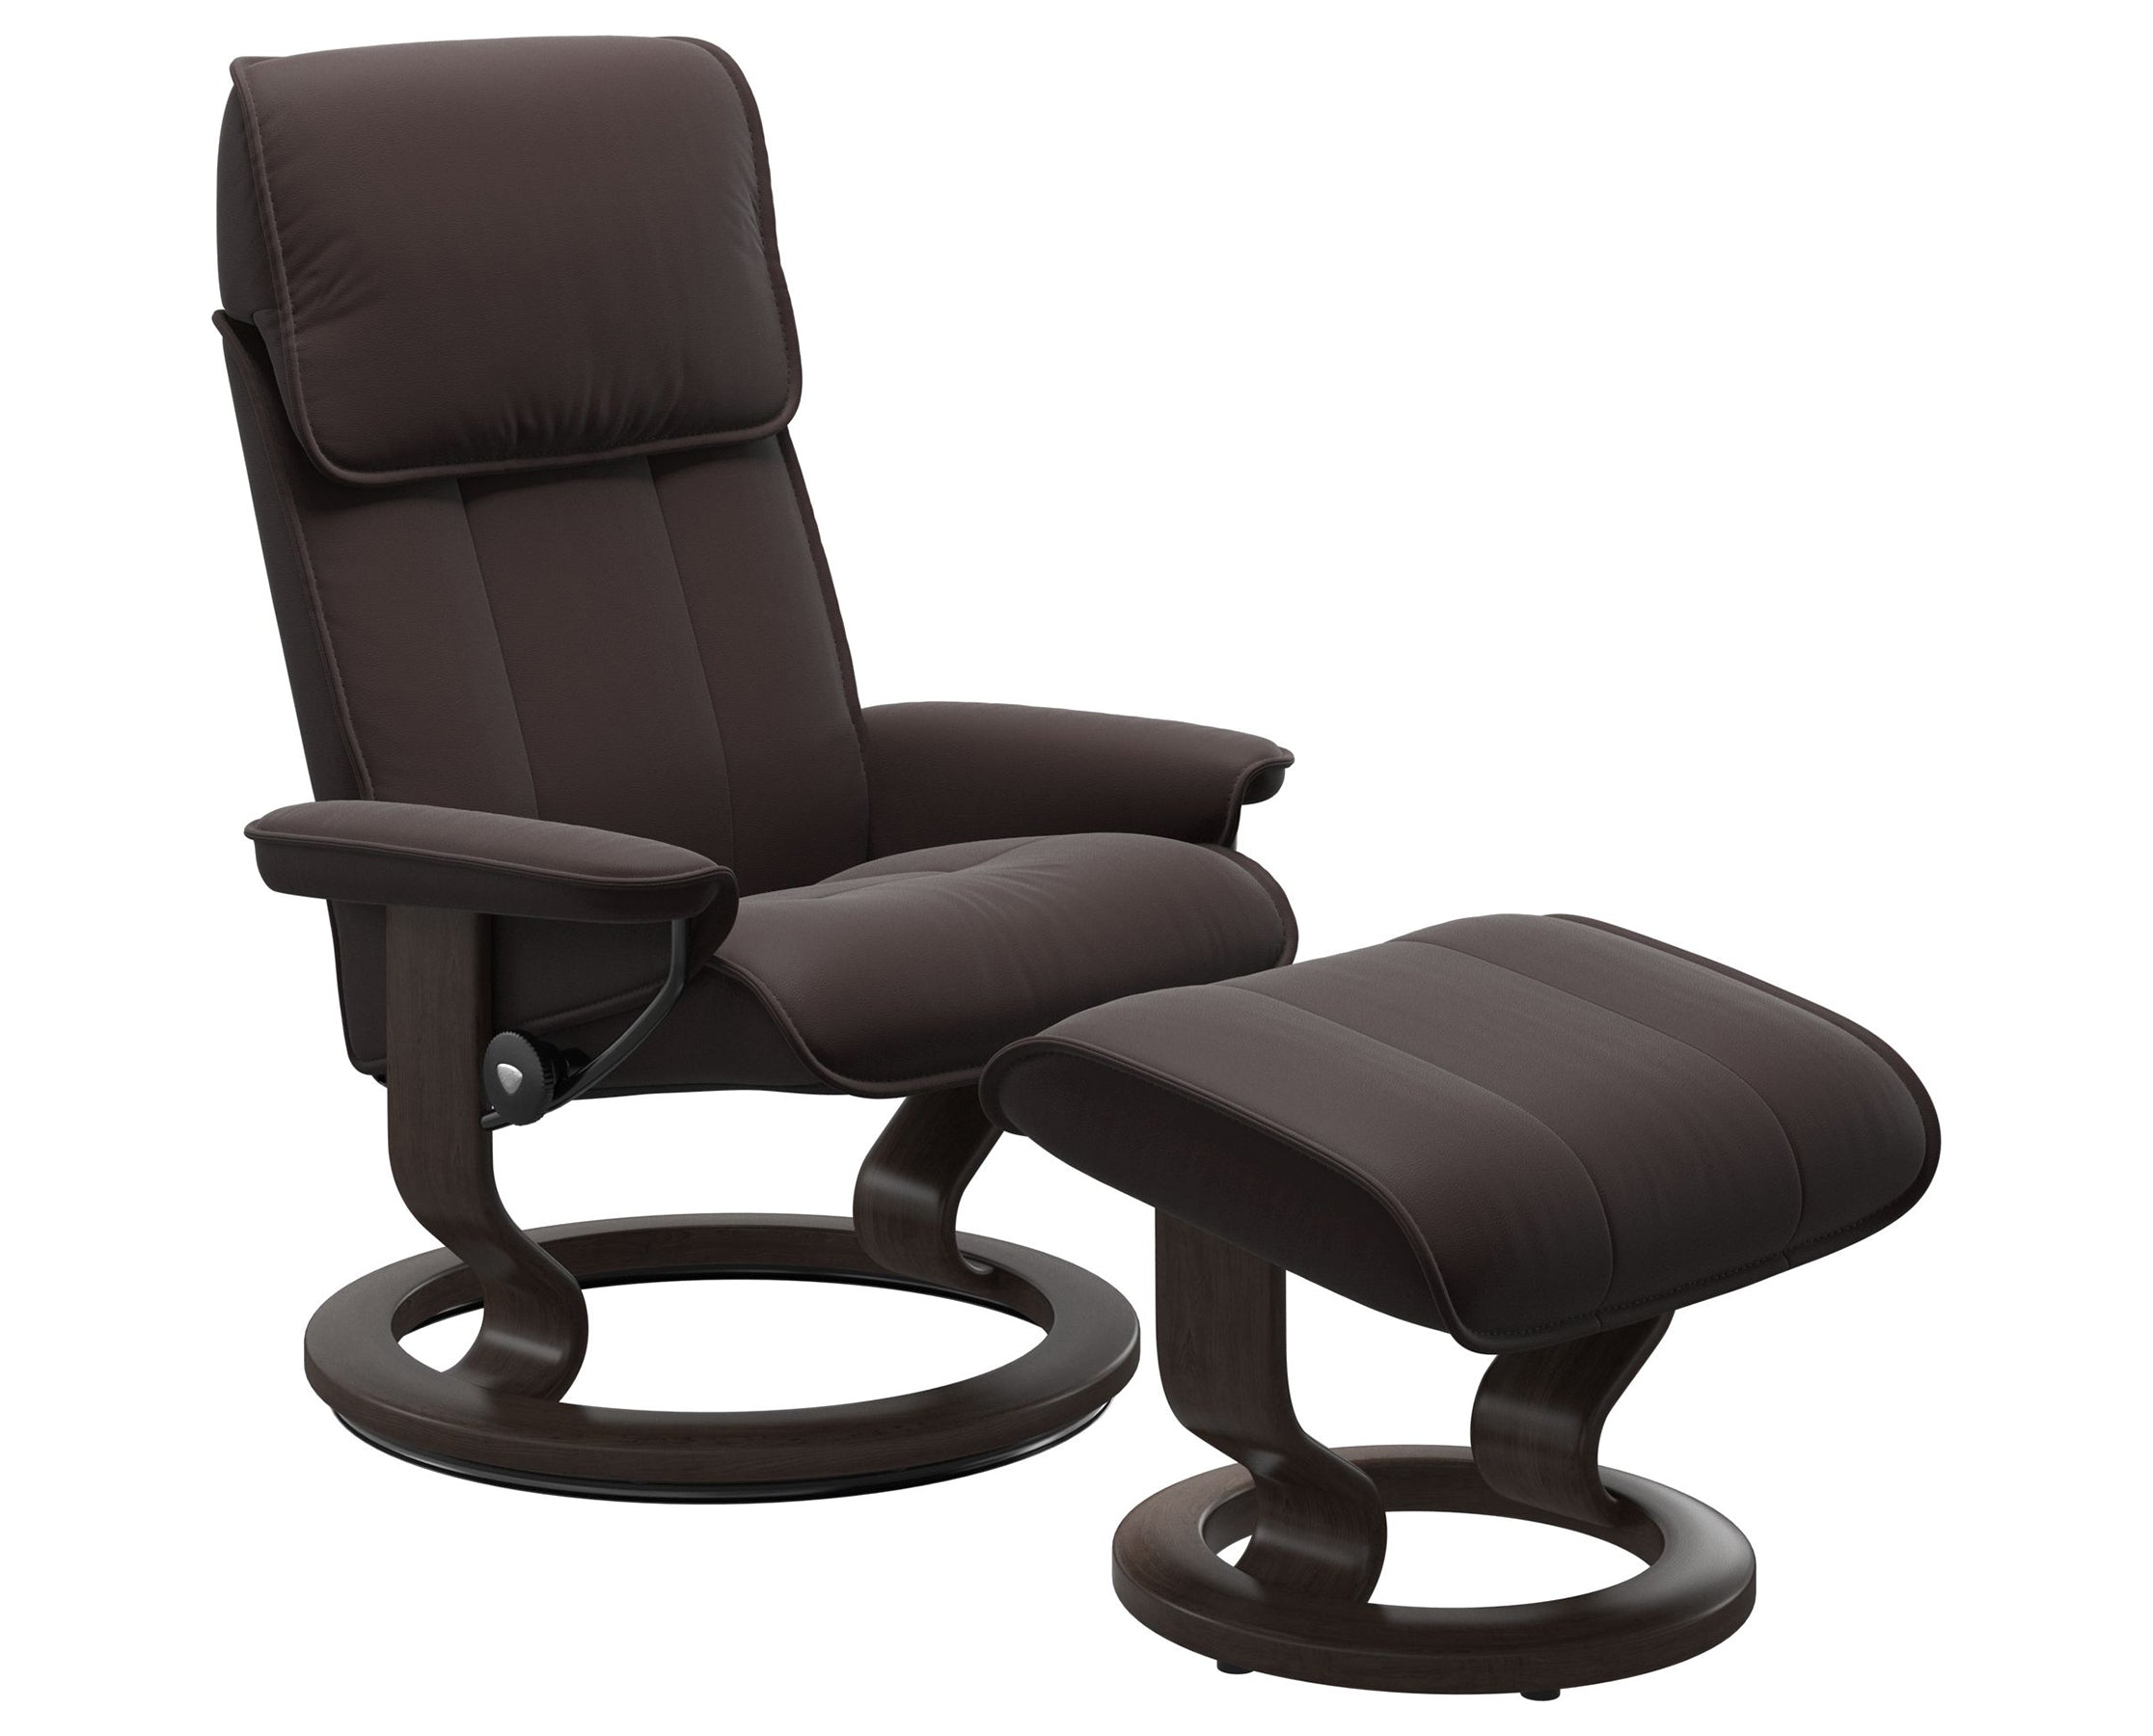 Paloma Leather Chocolate M/L and Wenge Base | Stressless Admiral Classic Recliner | Valley Ridge Furniture